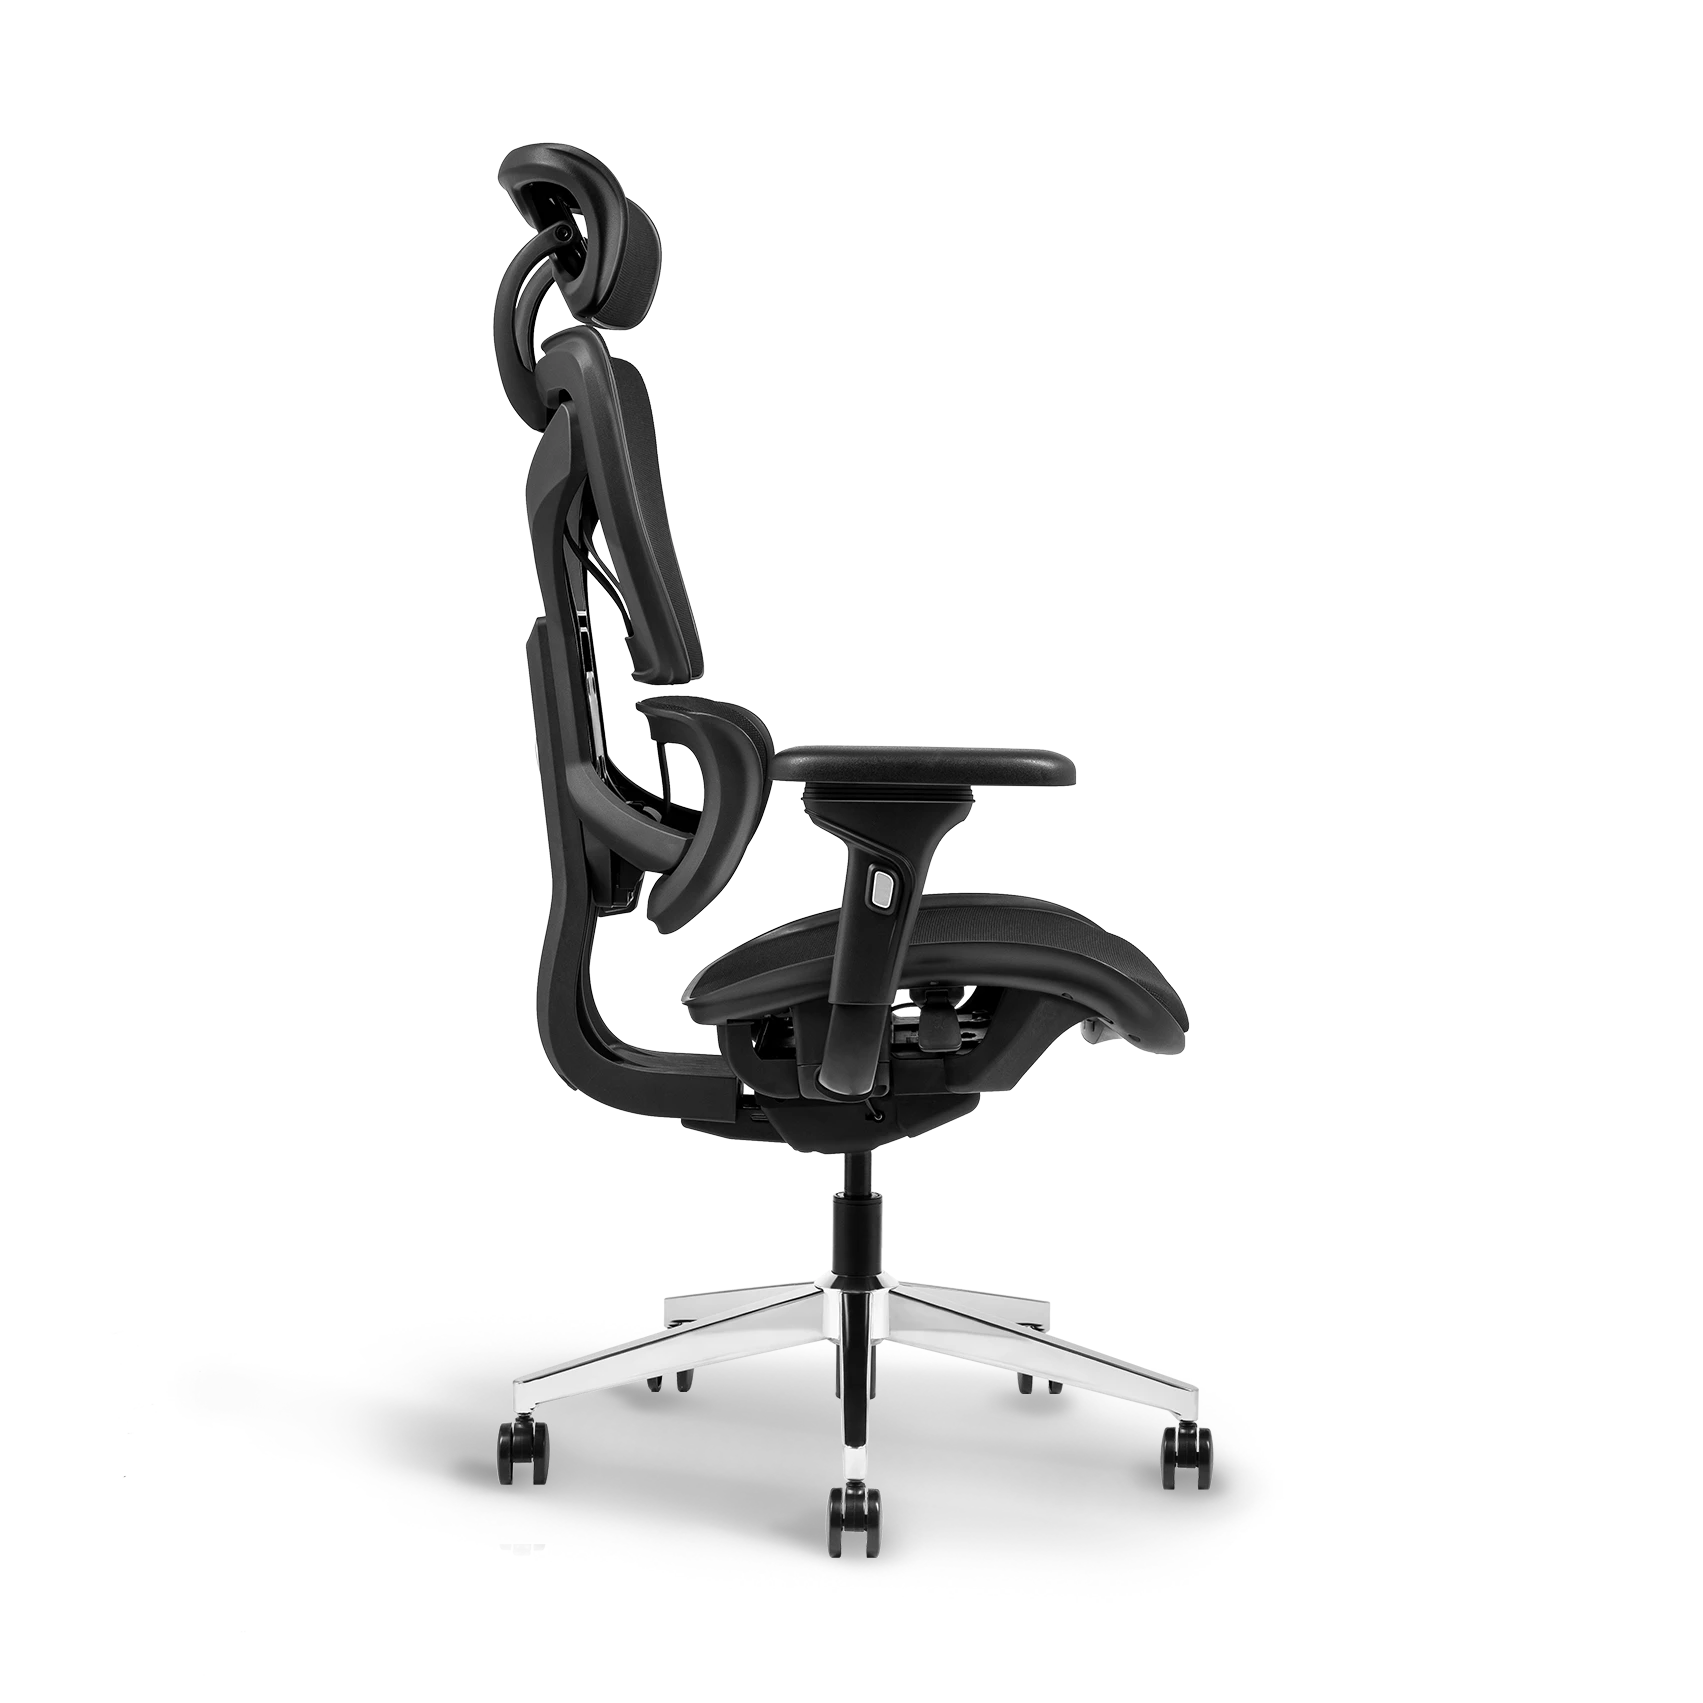 Side view of Ayla Ergonomic Chair Black highlighting the contoured design and height adjustment mechanism for personalized seating